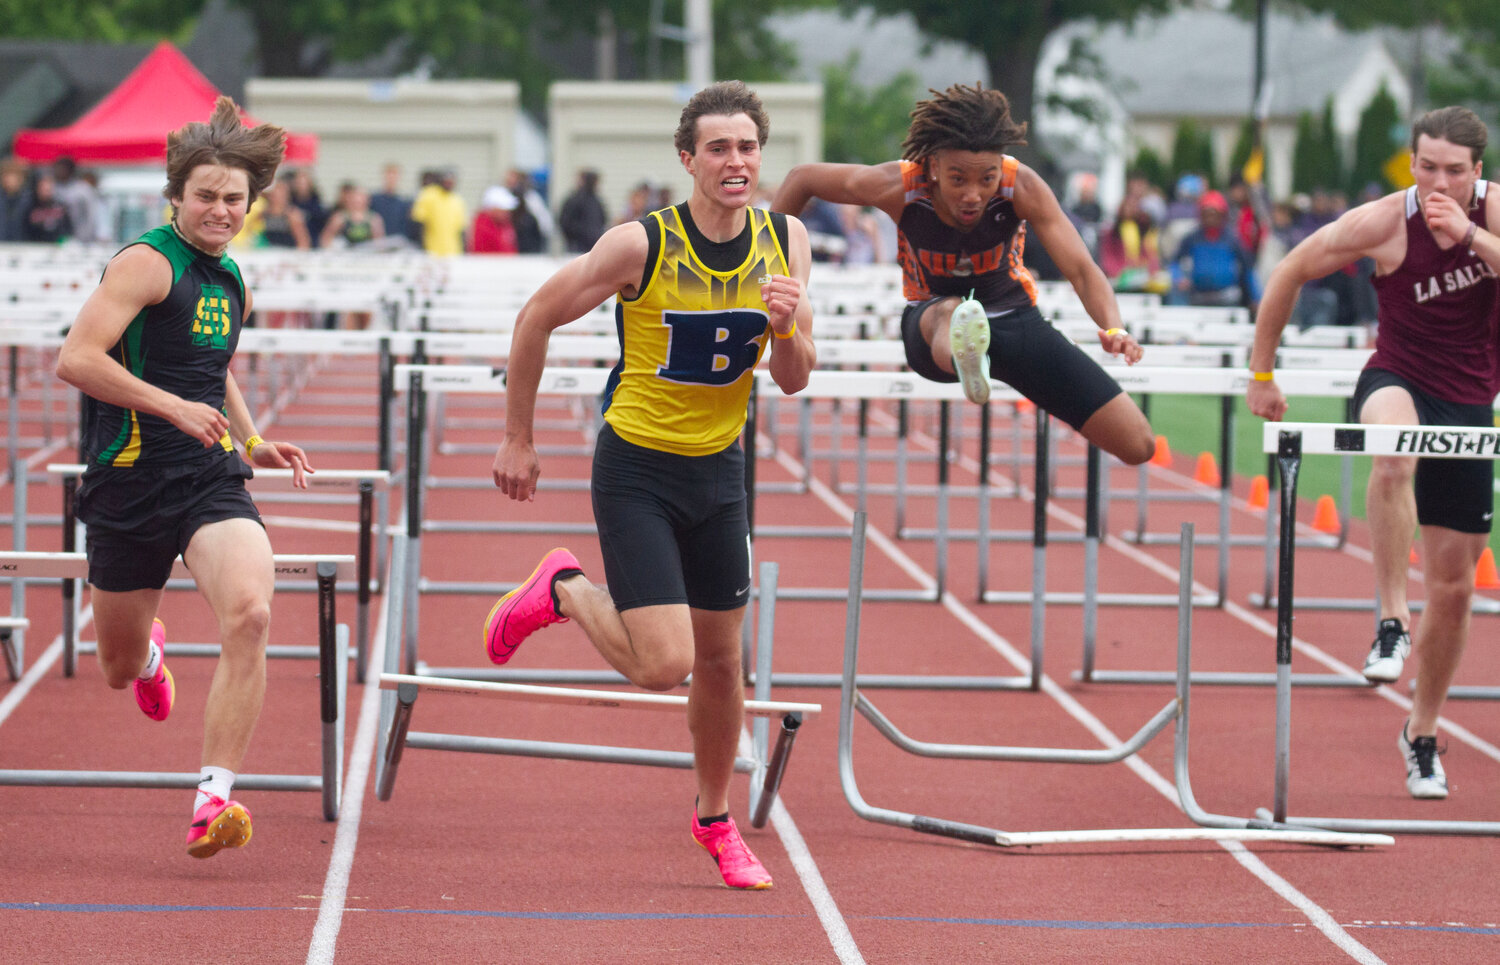 Barrington's Ethan Knight (center) pushes over the final hurdle in the 110-meter hurdles event at the state track meet.